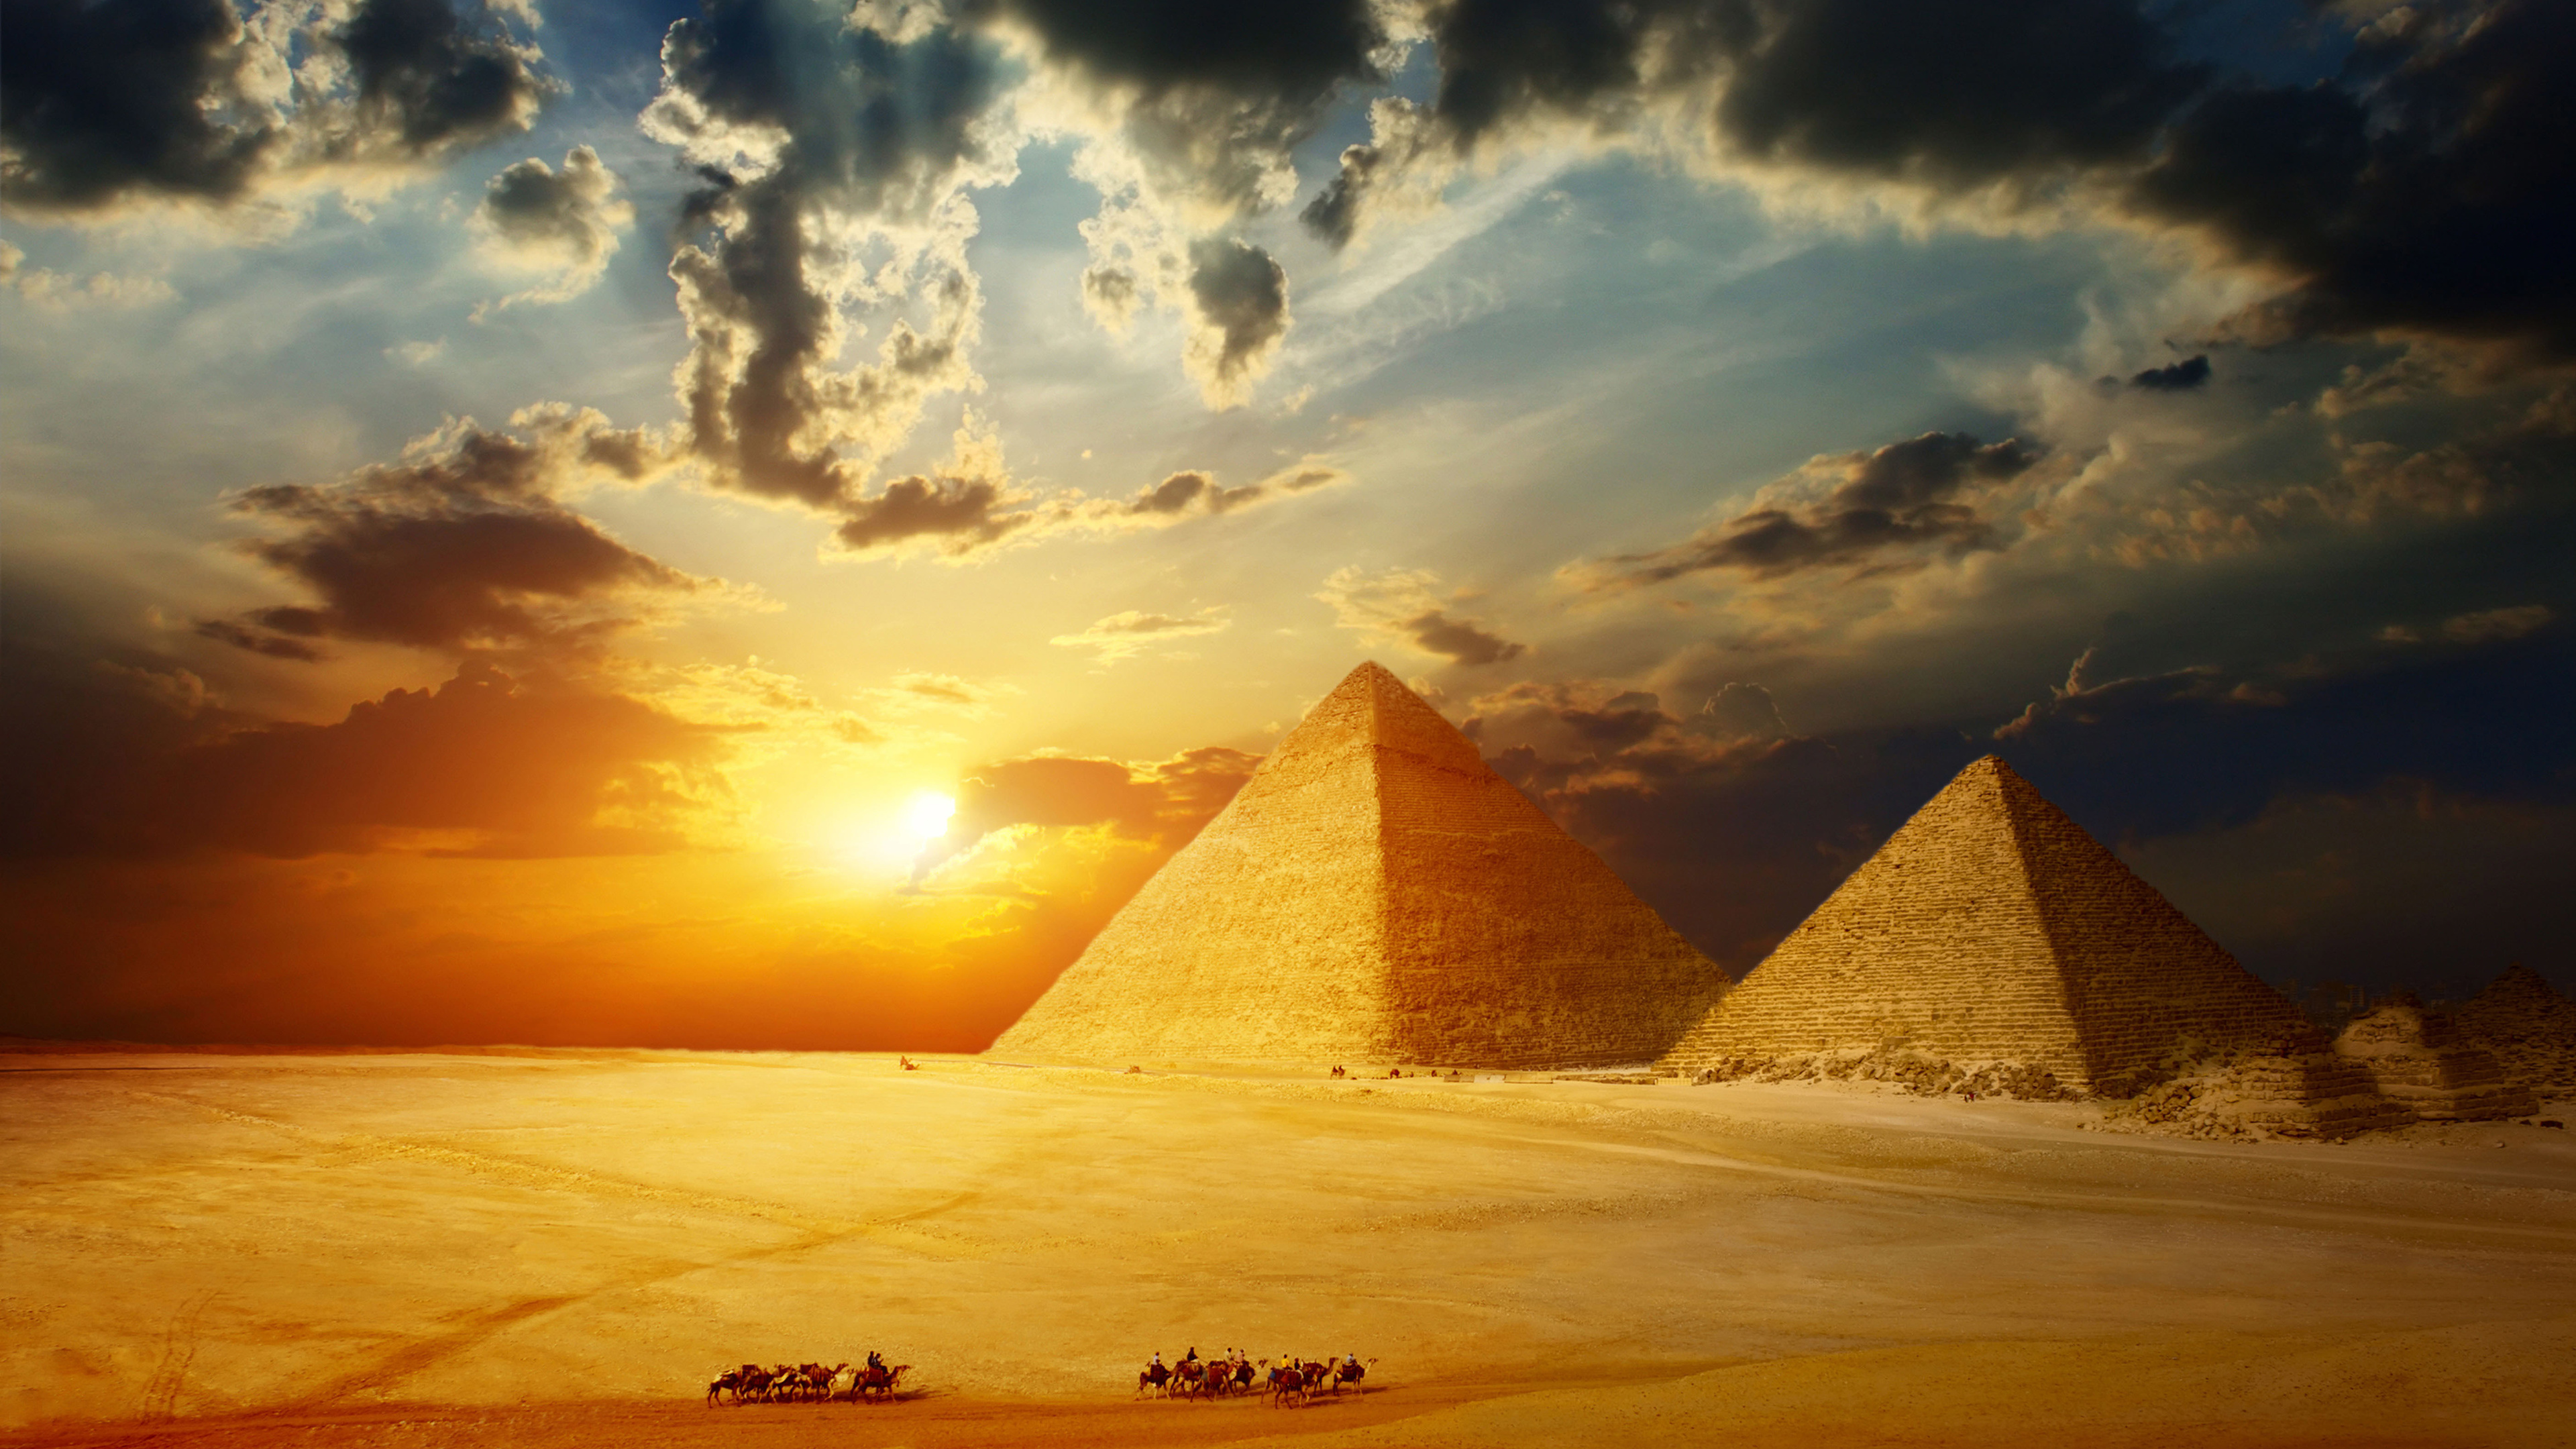 Brown Pyramid on White Sand During Sunset. Wallpaper in 3840x2160 Resolution